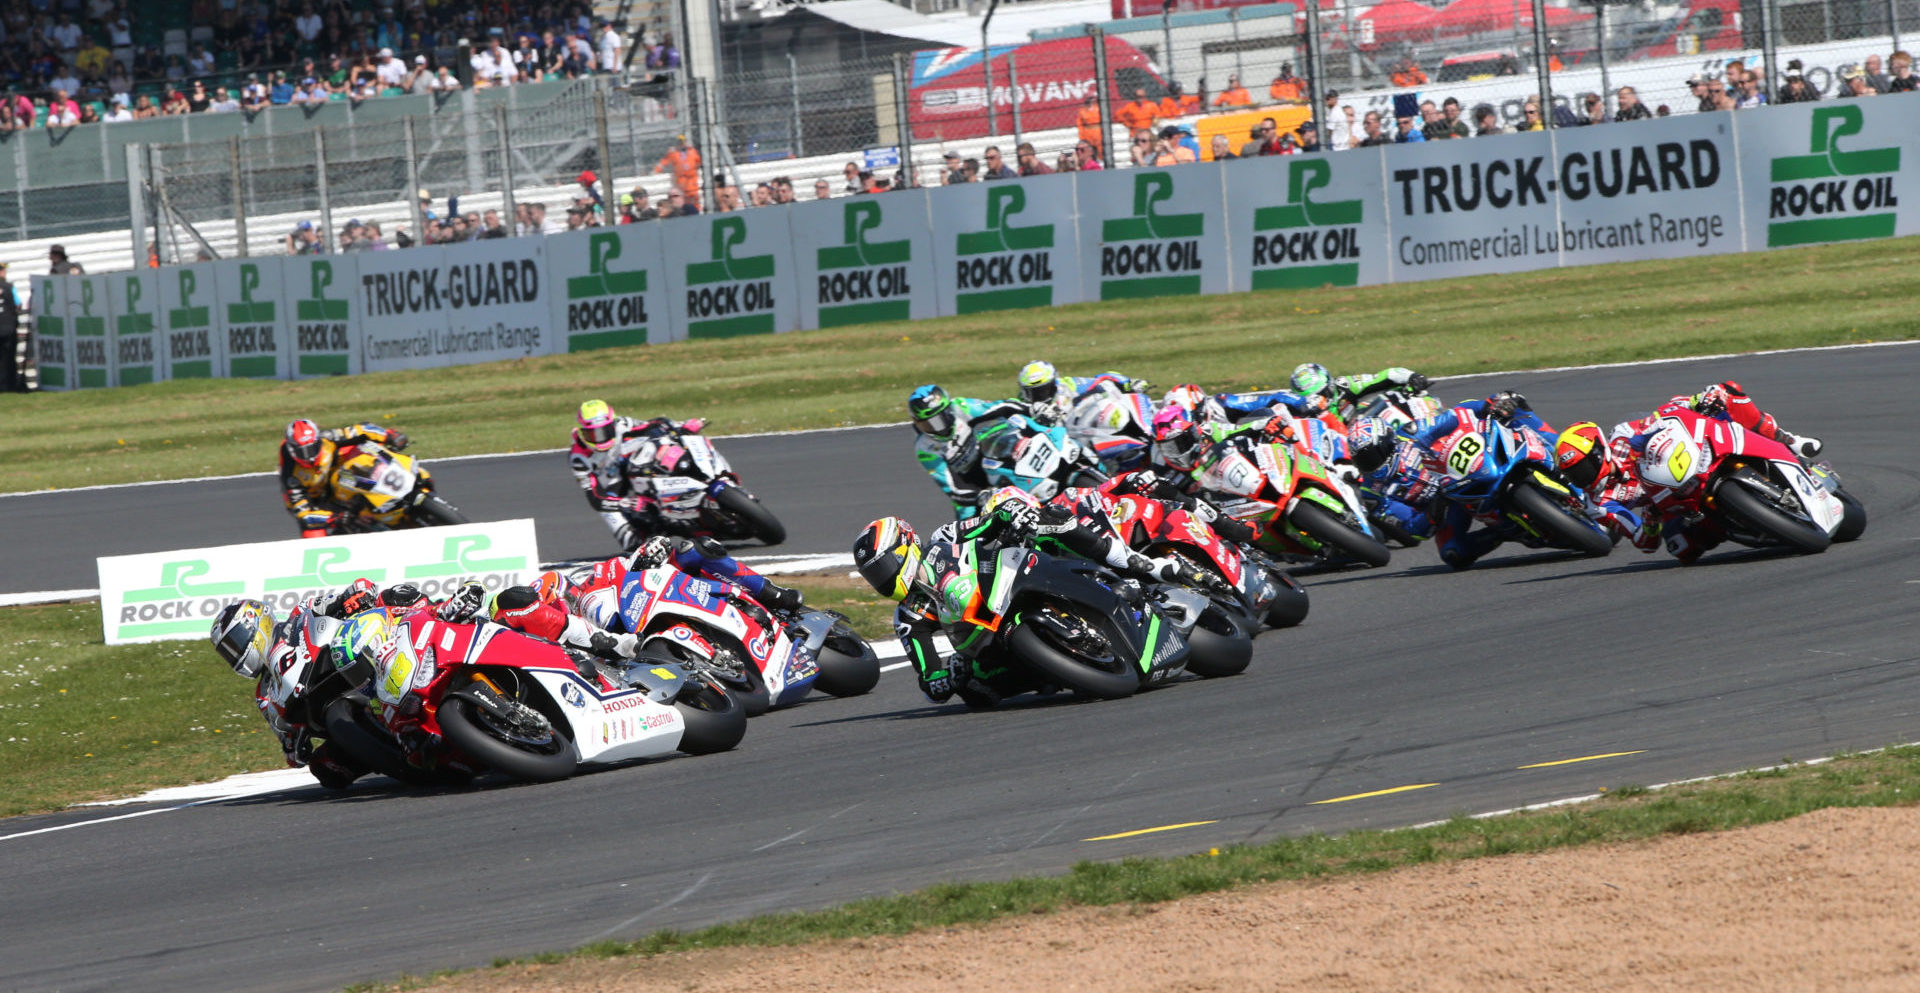 The start of a British Superbike race at Silverstone in 2019. Photo courtesy of MSVR.